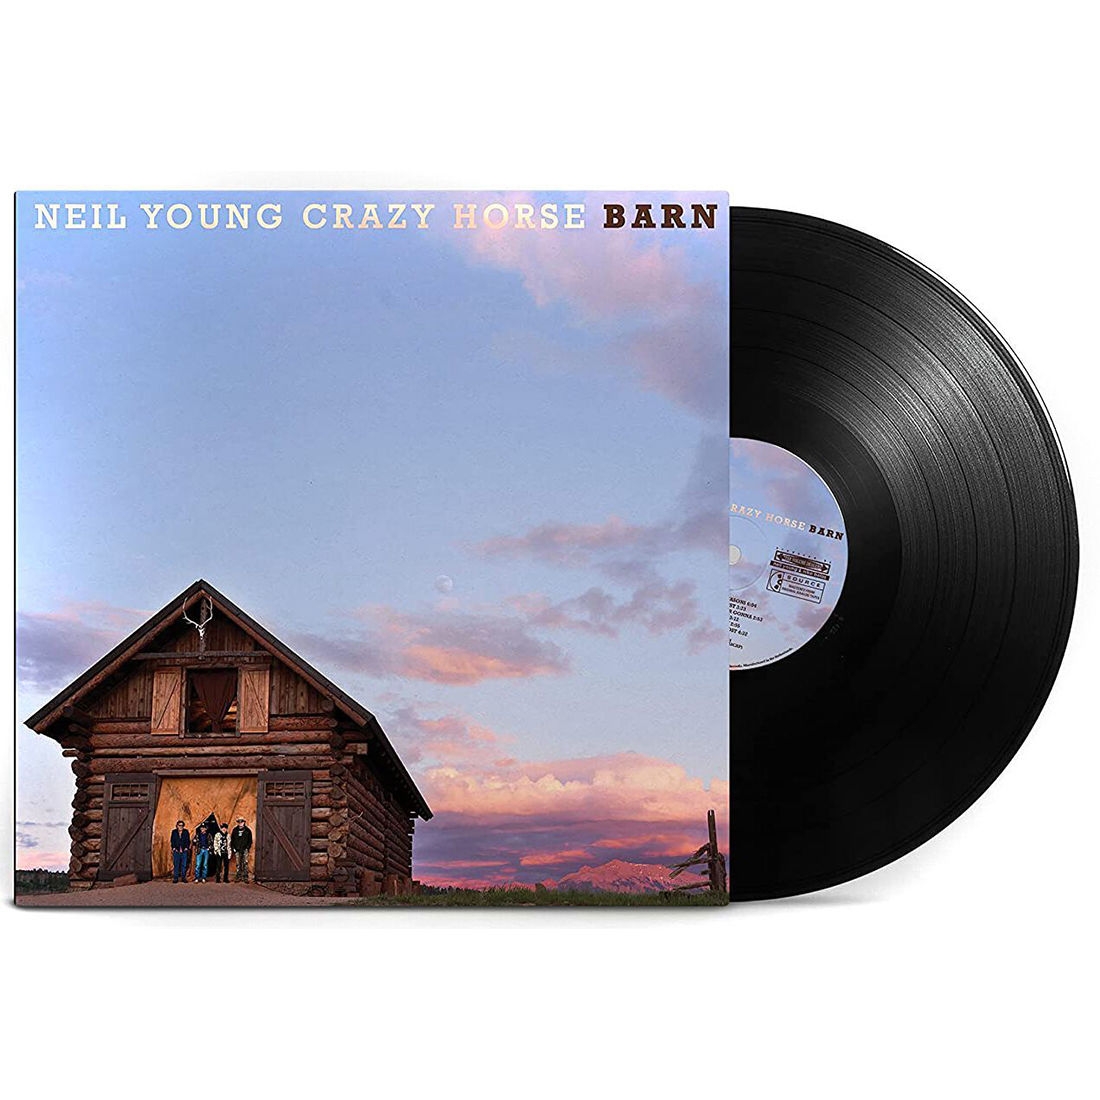 Виниловая Пластинка Young, Neil / Crazy Horse Barn (0093624878445) the lost love song